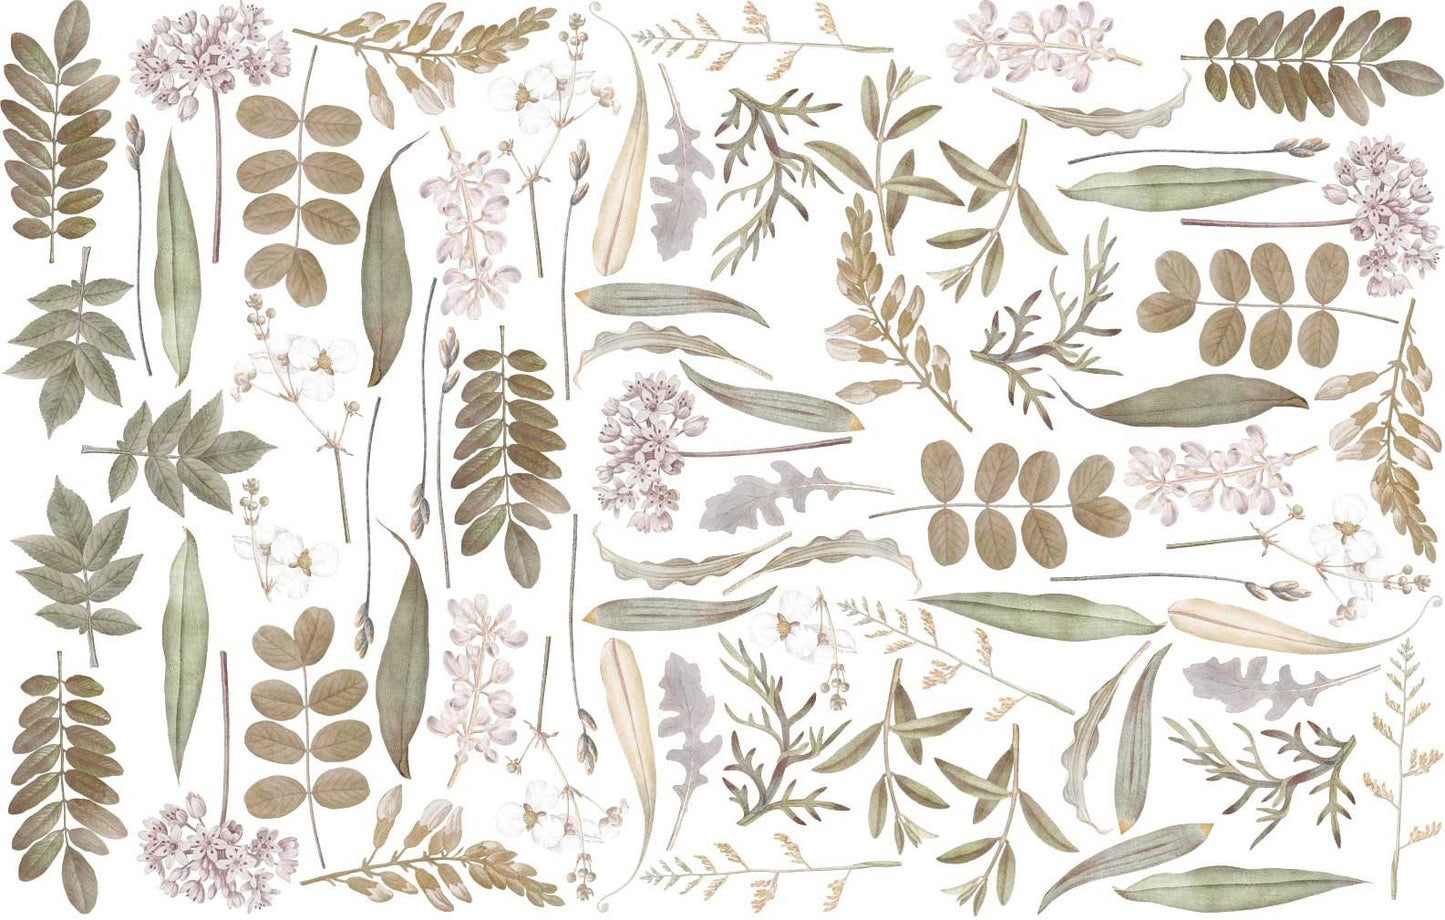 Vintage Wild Flowers Wall Decals Greenery Stickers, LF274